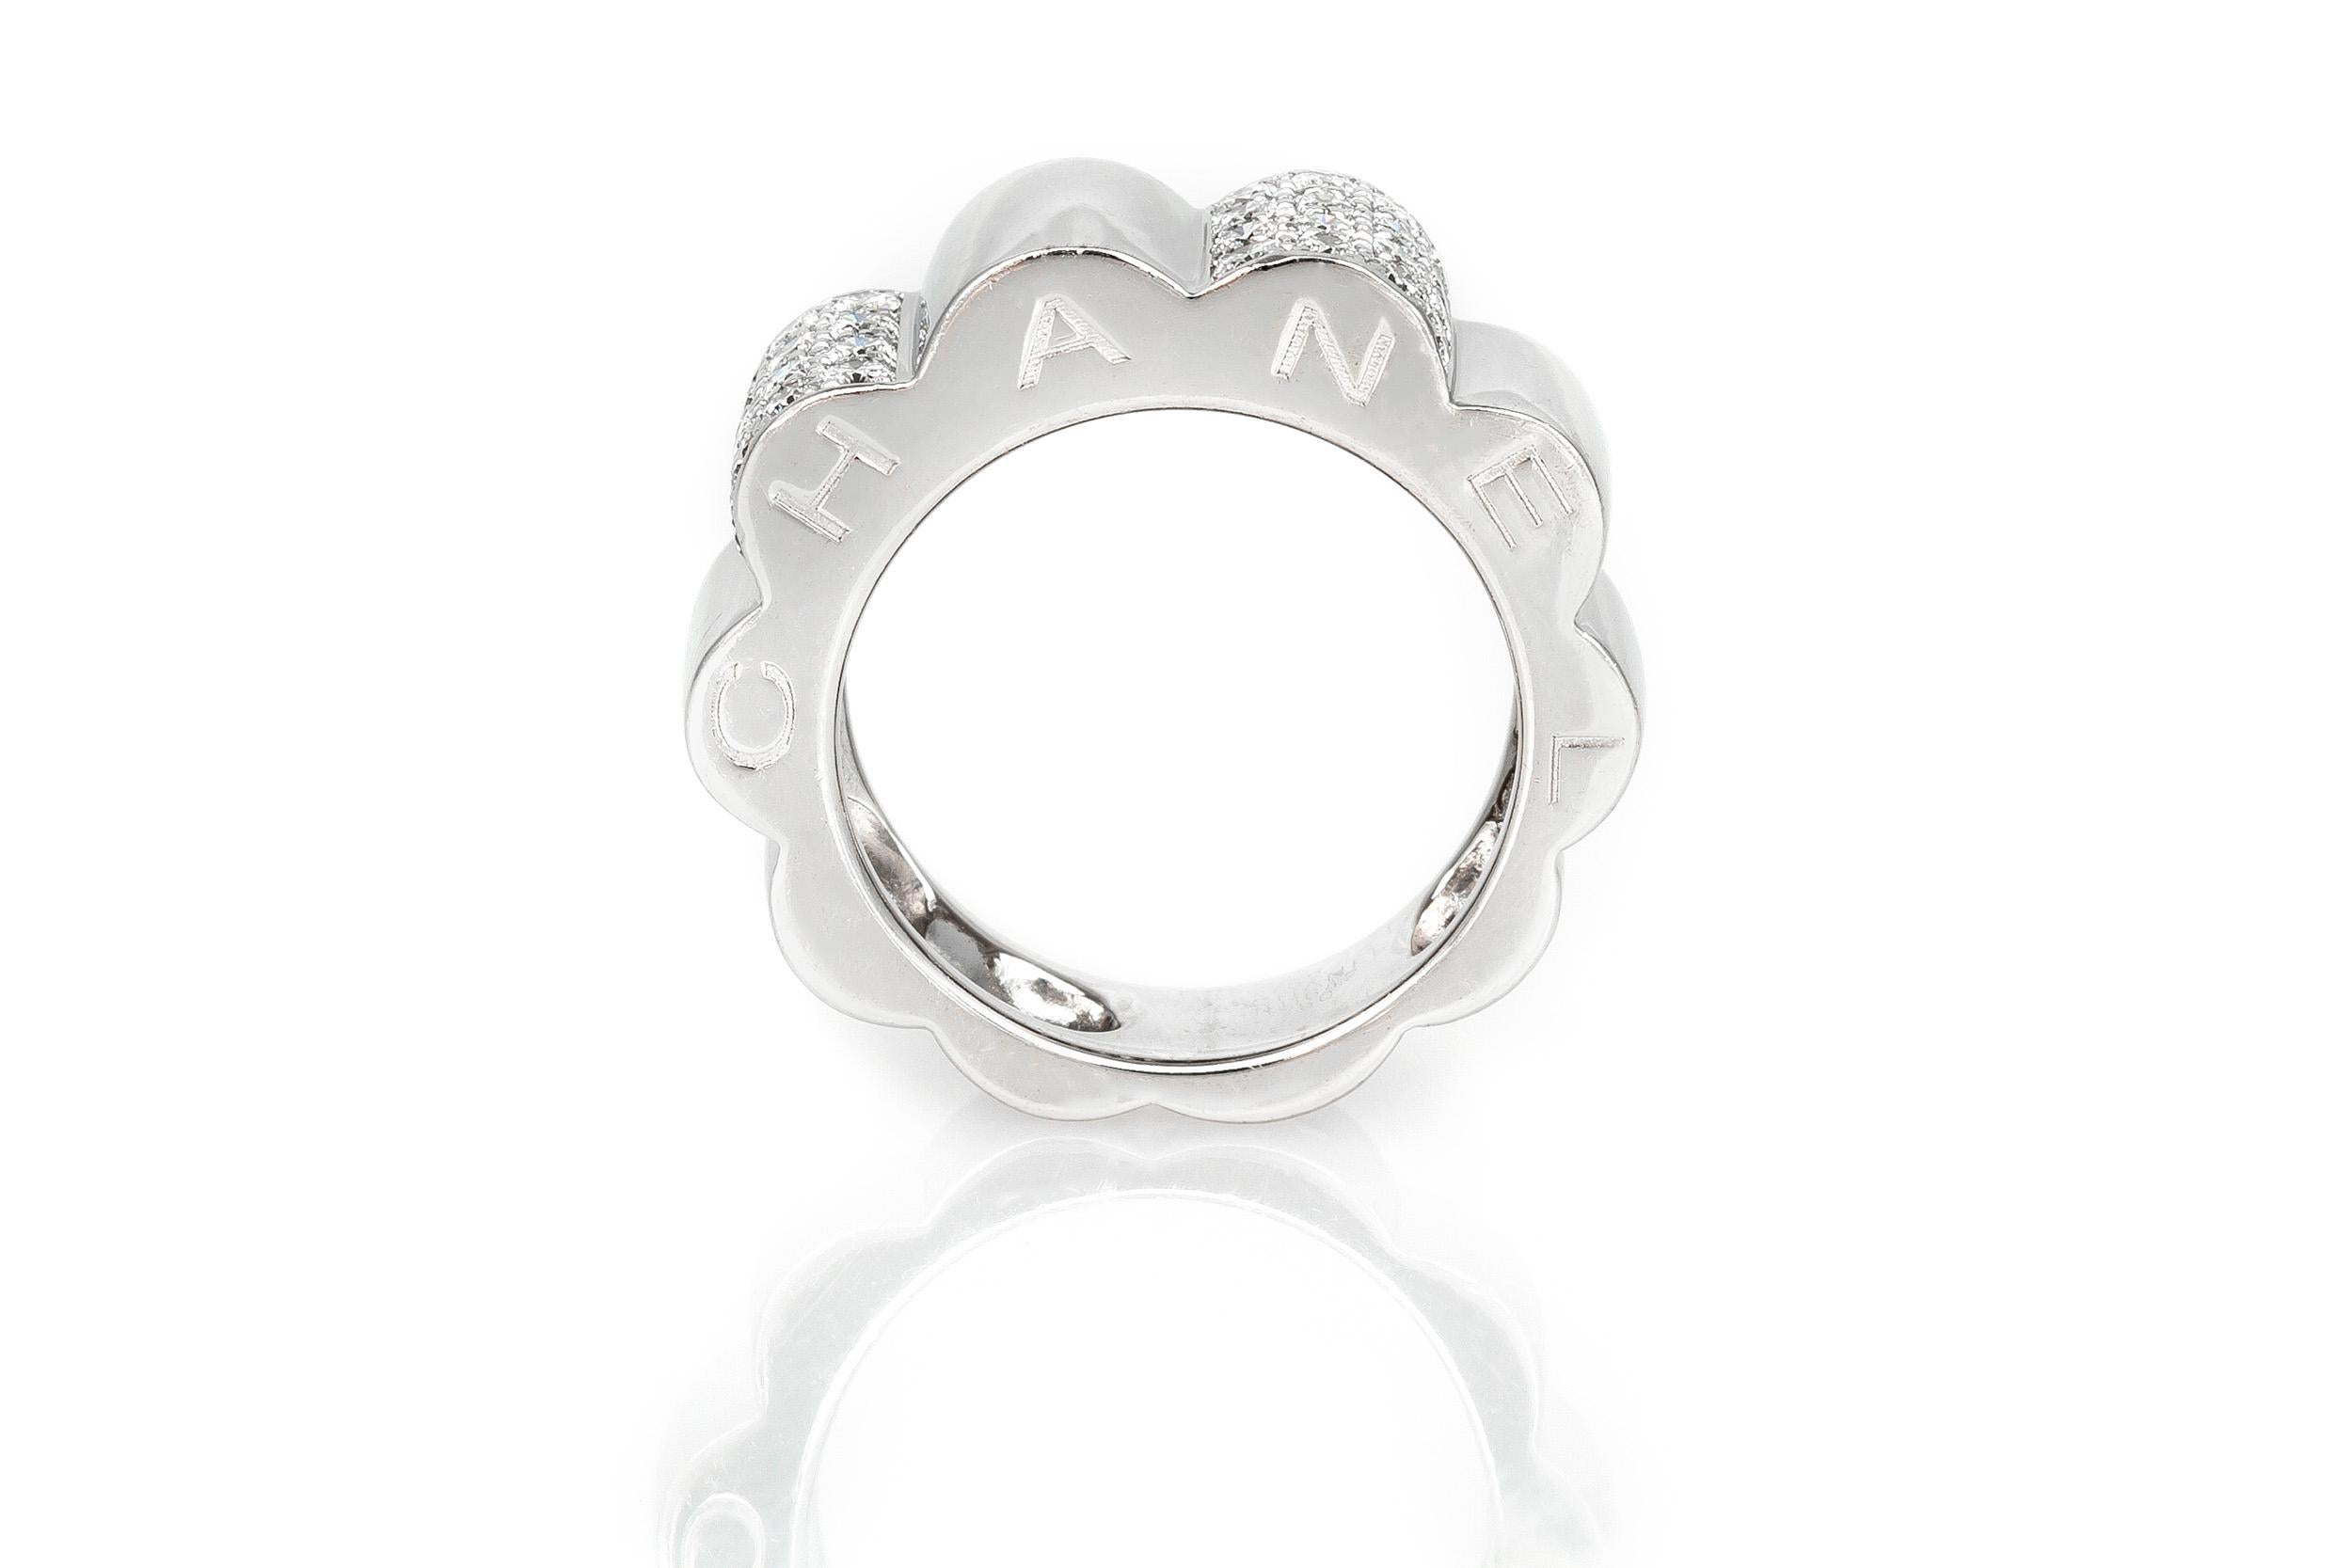 CHANEL ring finely crafted in white gold with diamonds.